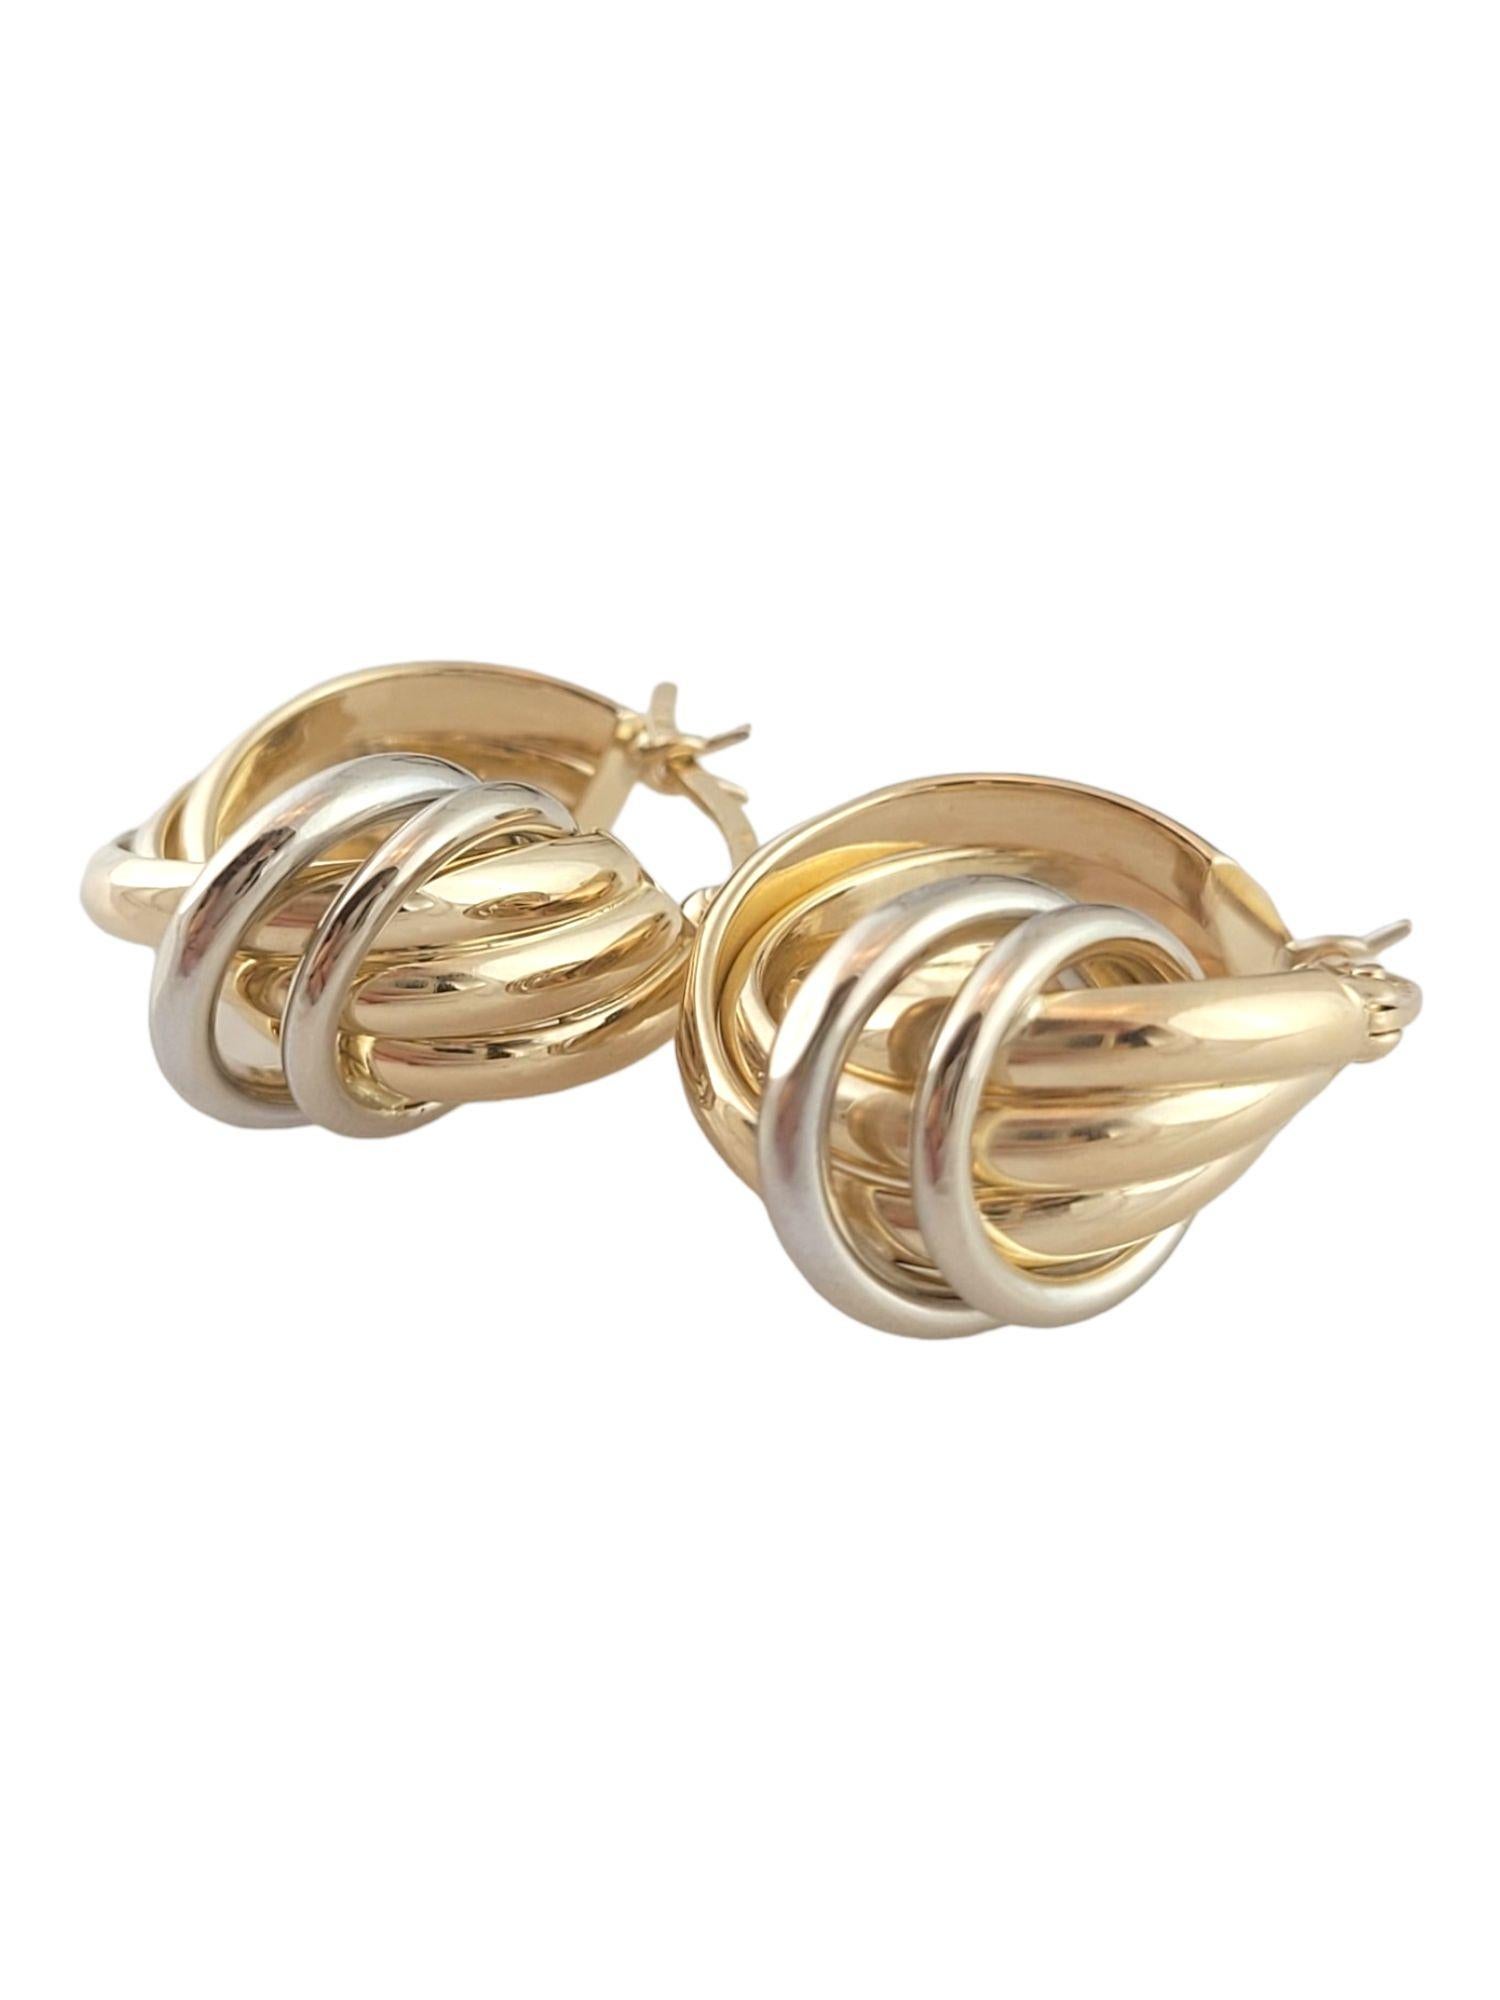 Gorgeous set of knot twisted hoops crafted from 14K white and yellow gold!

Size: 20.4mm X 17.4mm X 12.0mm

Weight: 4.25 g/ 2.7 dwt

Hallmark: ISRAEL 14K

Very good condition, professionally polished.

Will come packaged in a gift box or pouch (when